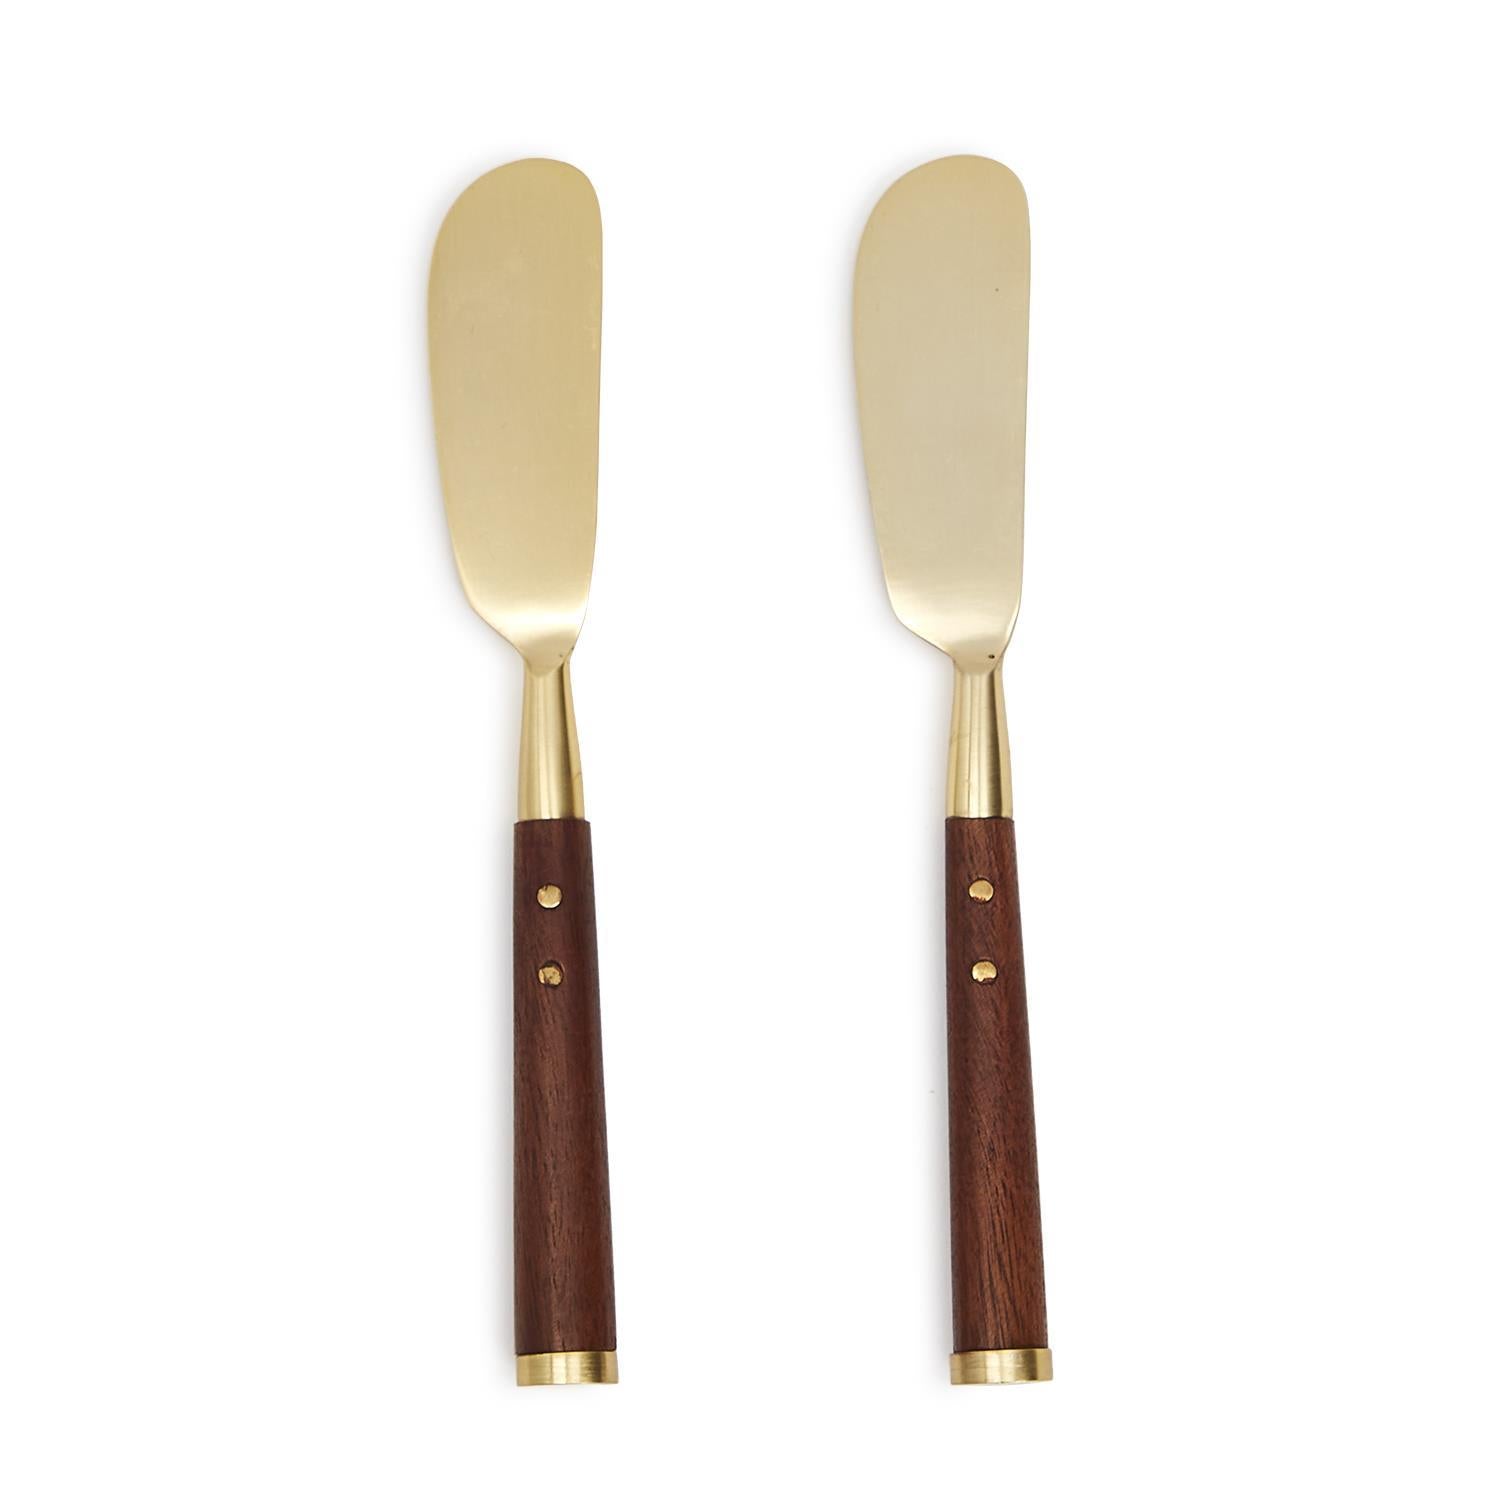 Acacia Wood 2 Spreaders on Gift Card Kitchen + Entertaining Two's Company   